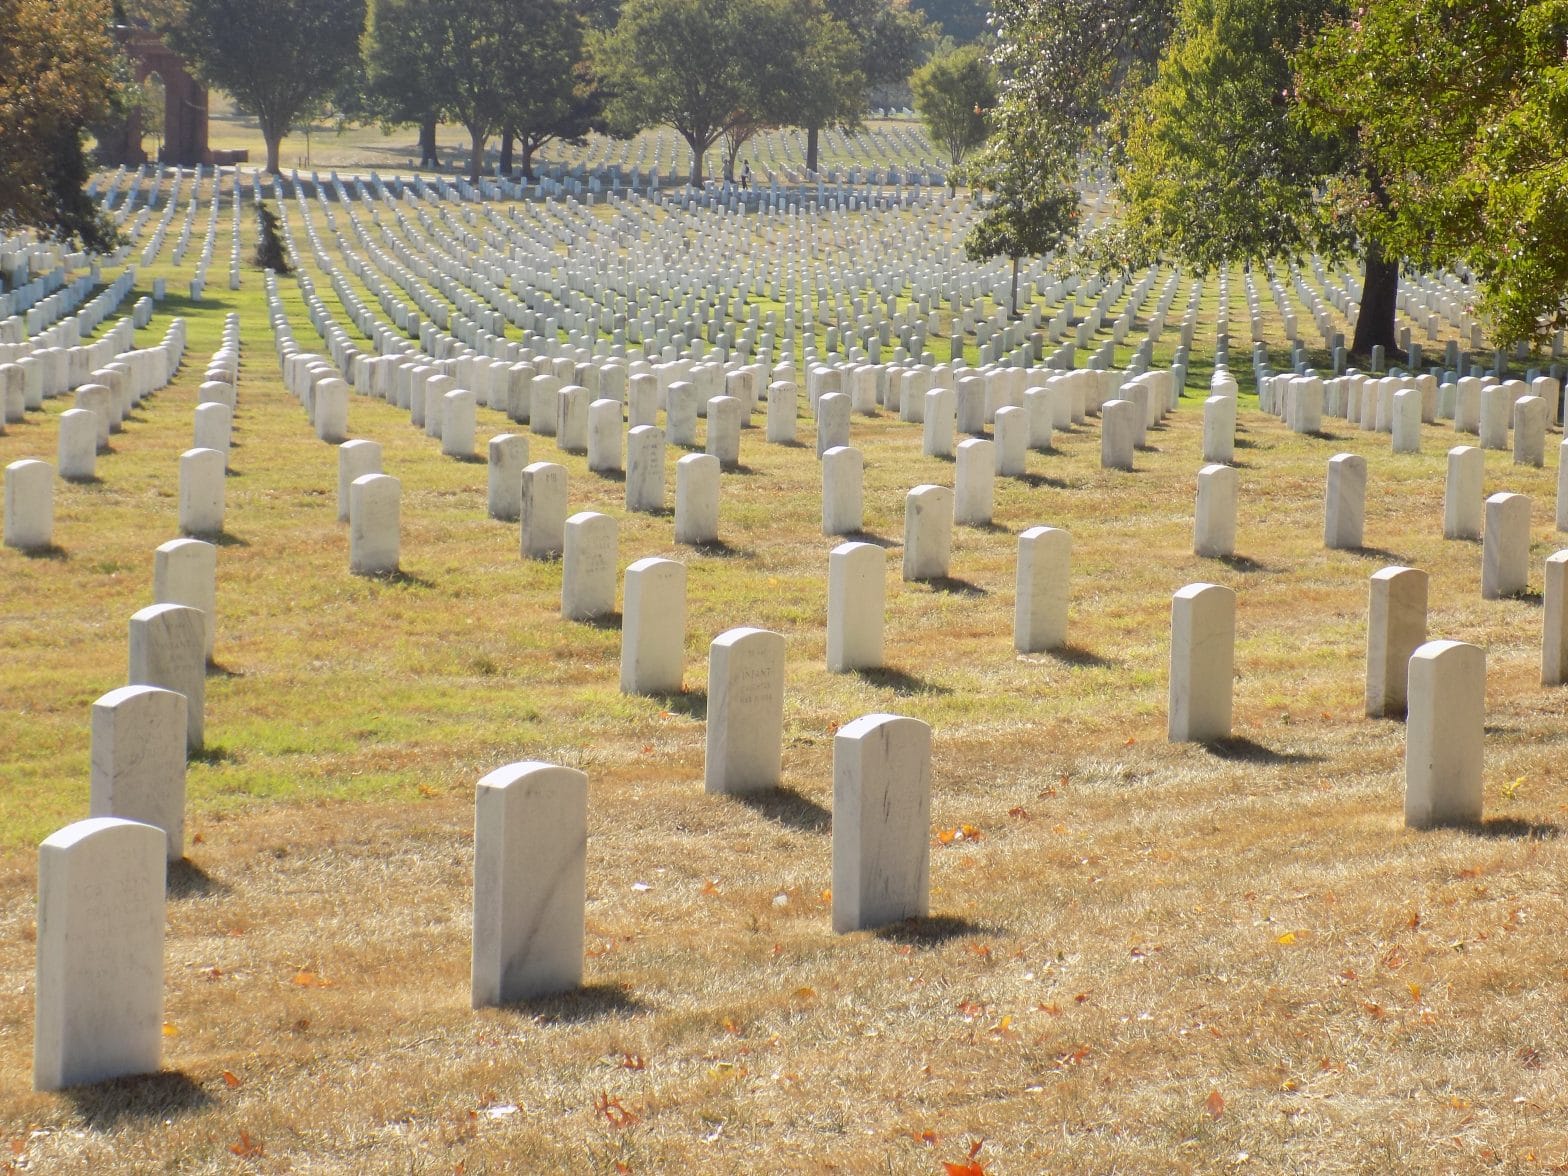 Army Proposes New Burial Rules to Extend Lifespan of Arlington Cemetery